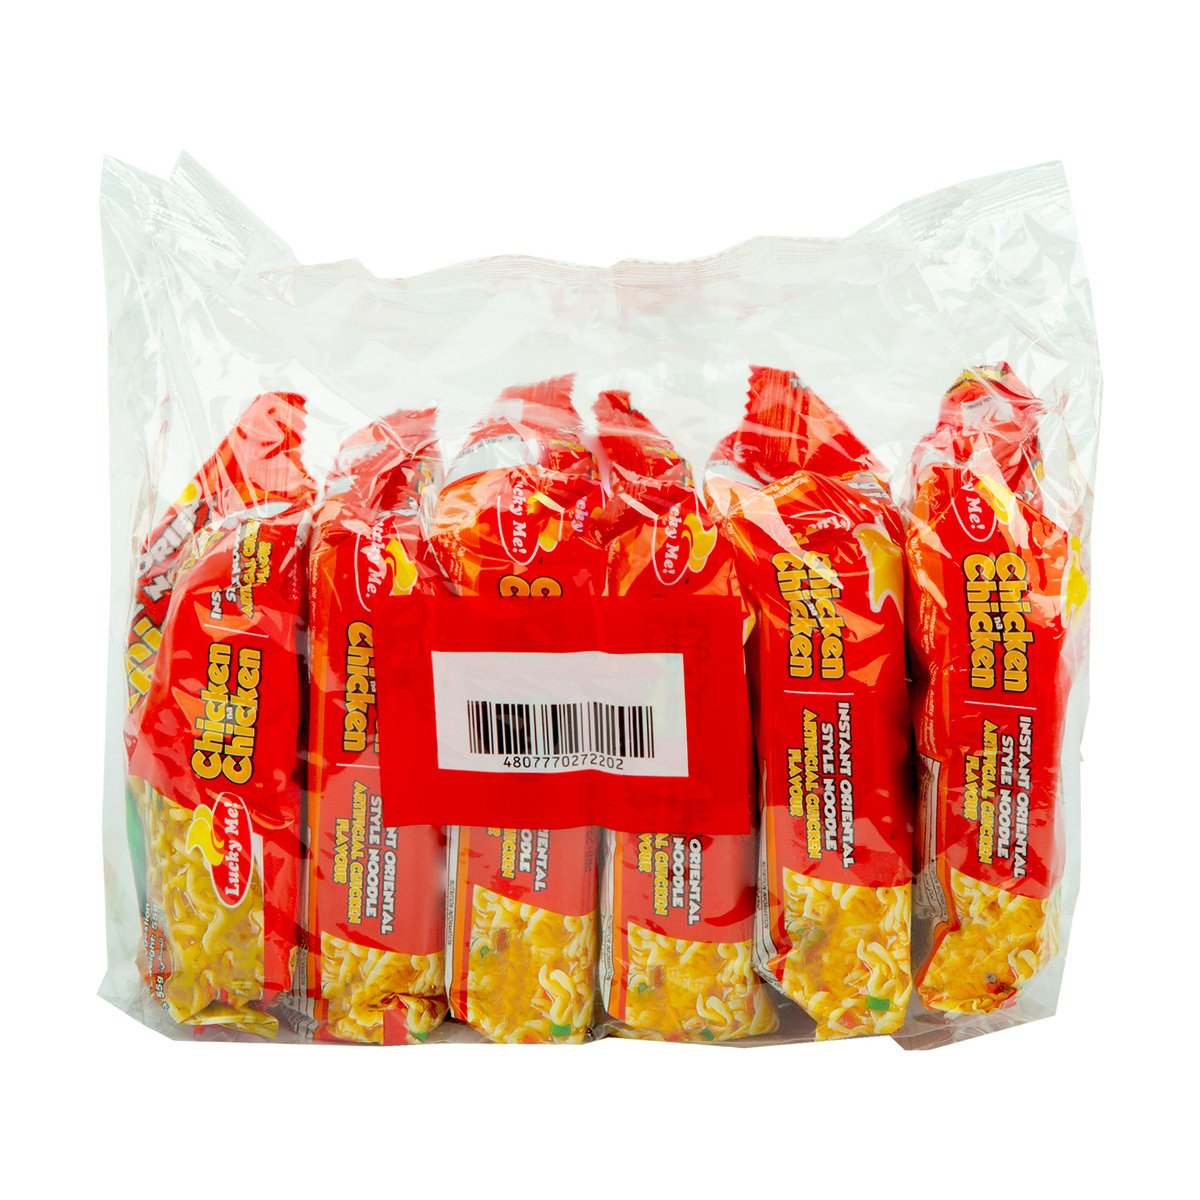 Lucky Me Chicken Noodles 6 x 55 g